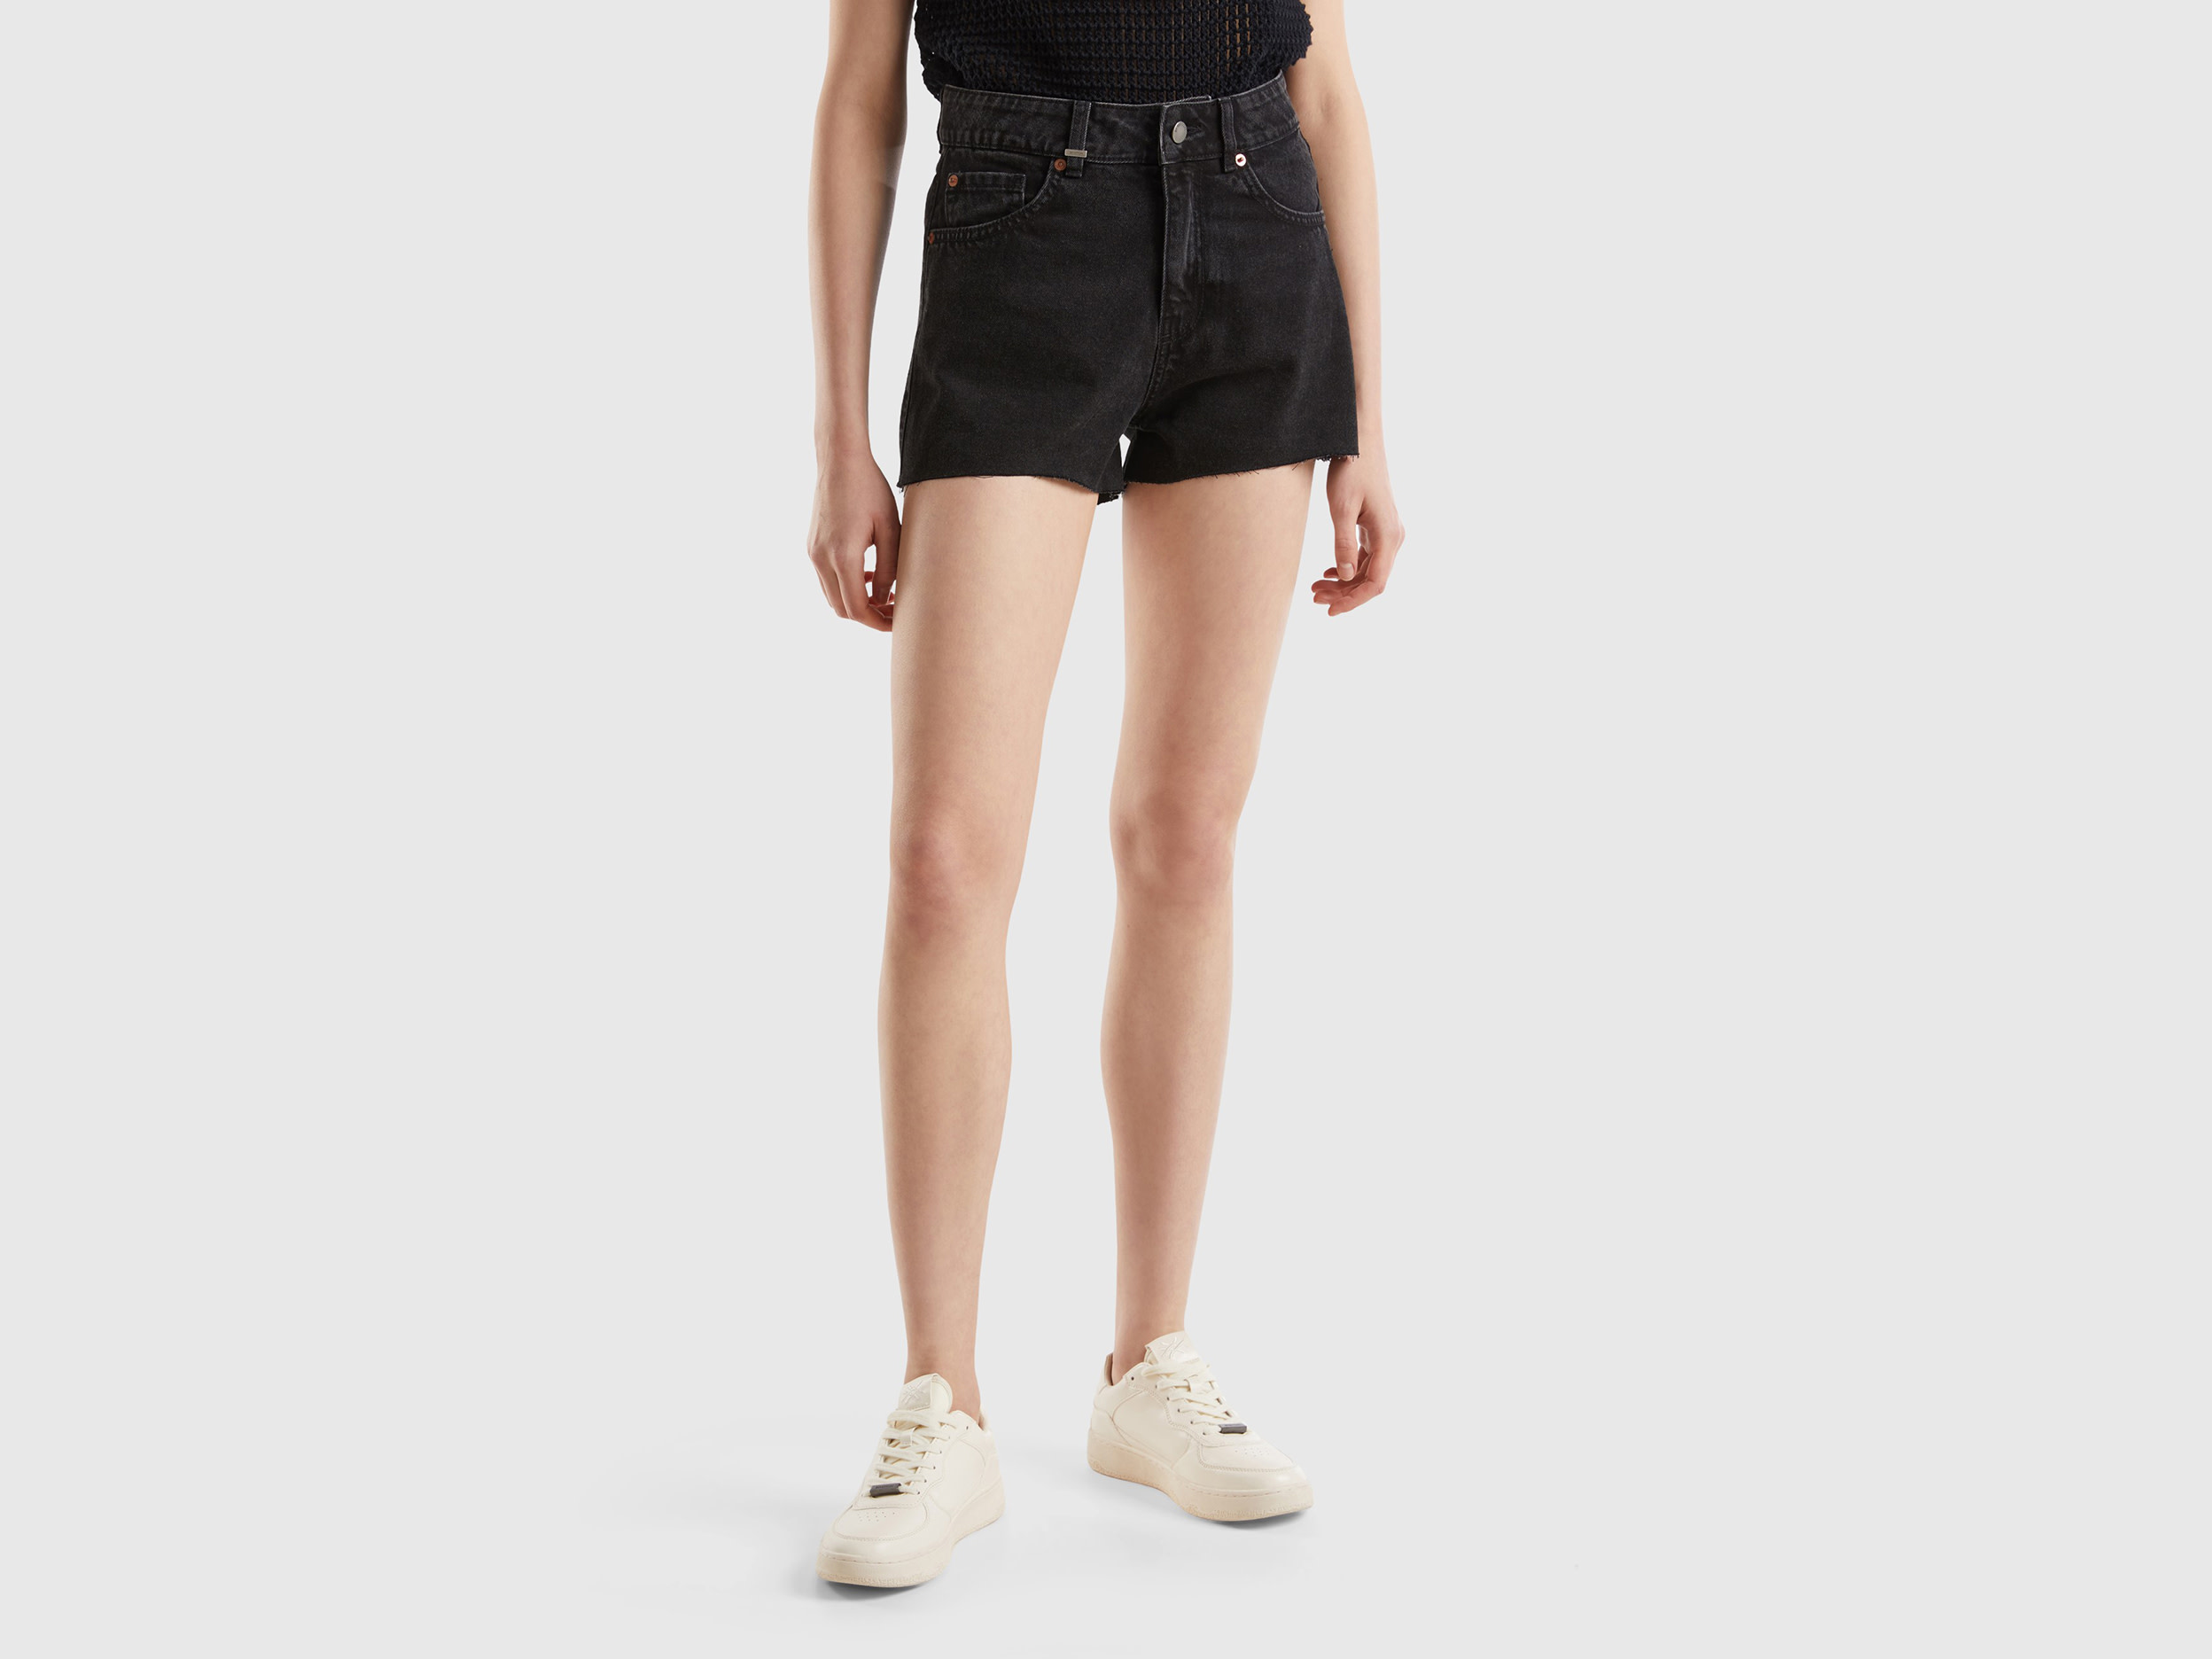 Image of Benetton, Frayed Shorts In Recycled Cotton Blend, size 32, Black, Women